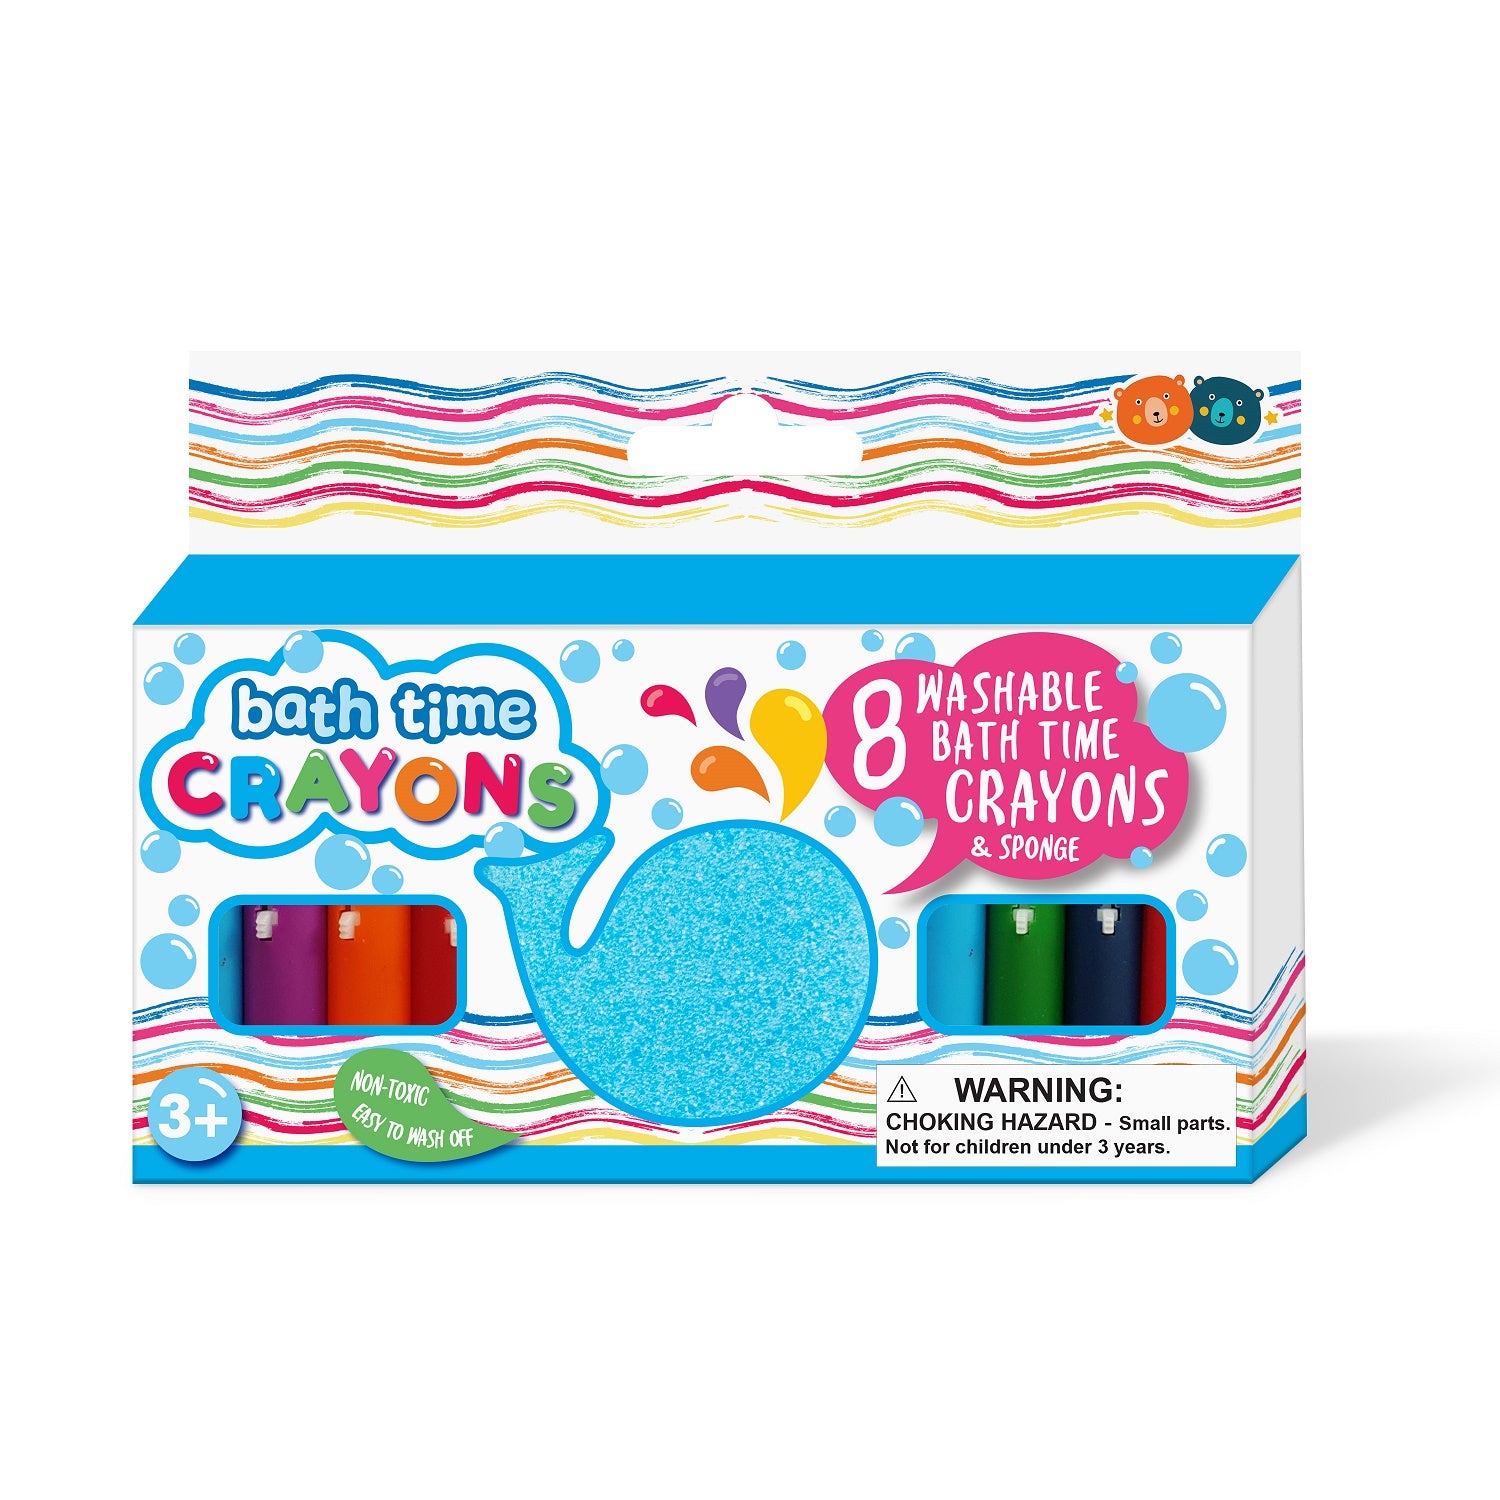 10 Bath Crayons For Kids Ages 4-8 | Washable Crayons | Gel Crayons for Kids  Bath Toys | Toddler Crayons | Non Toxic Crayons For 1 Year Old | Bathtub